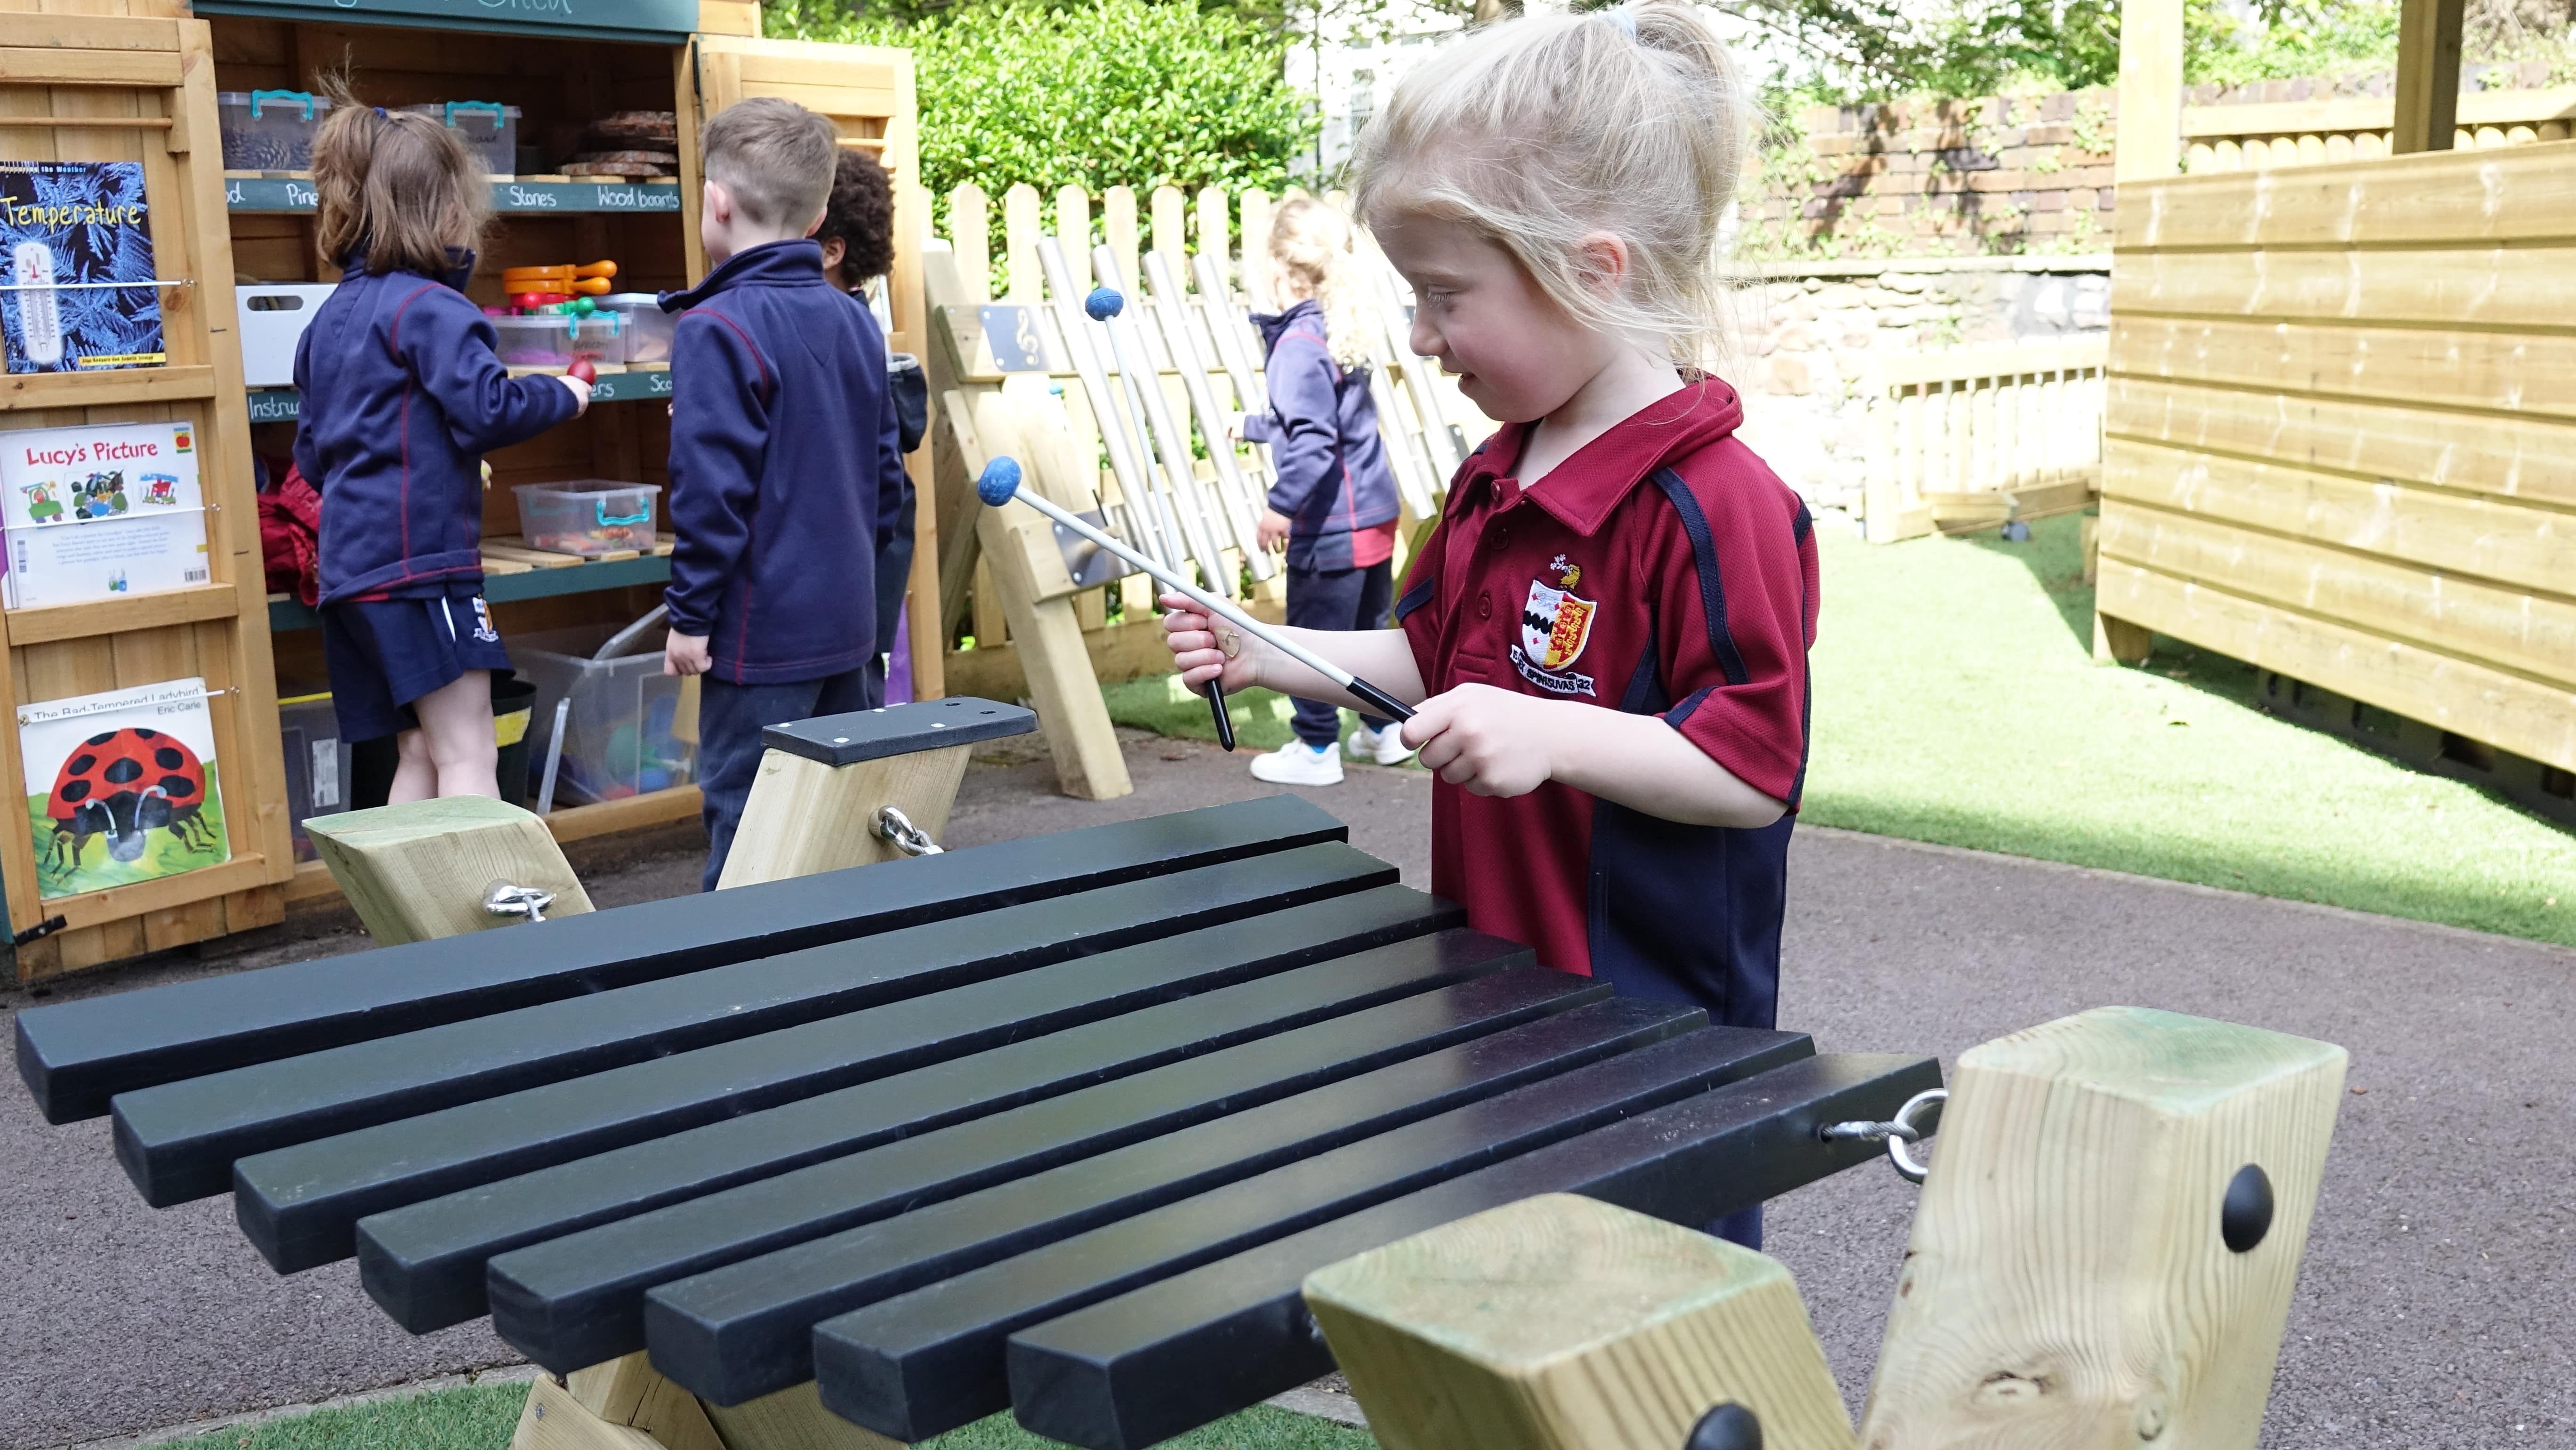 A little girl is playing with a Xylophone, which is on a wooden stand. The girl is holding two sticks to hit each chime as children behind her and looking through a storage cupboard